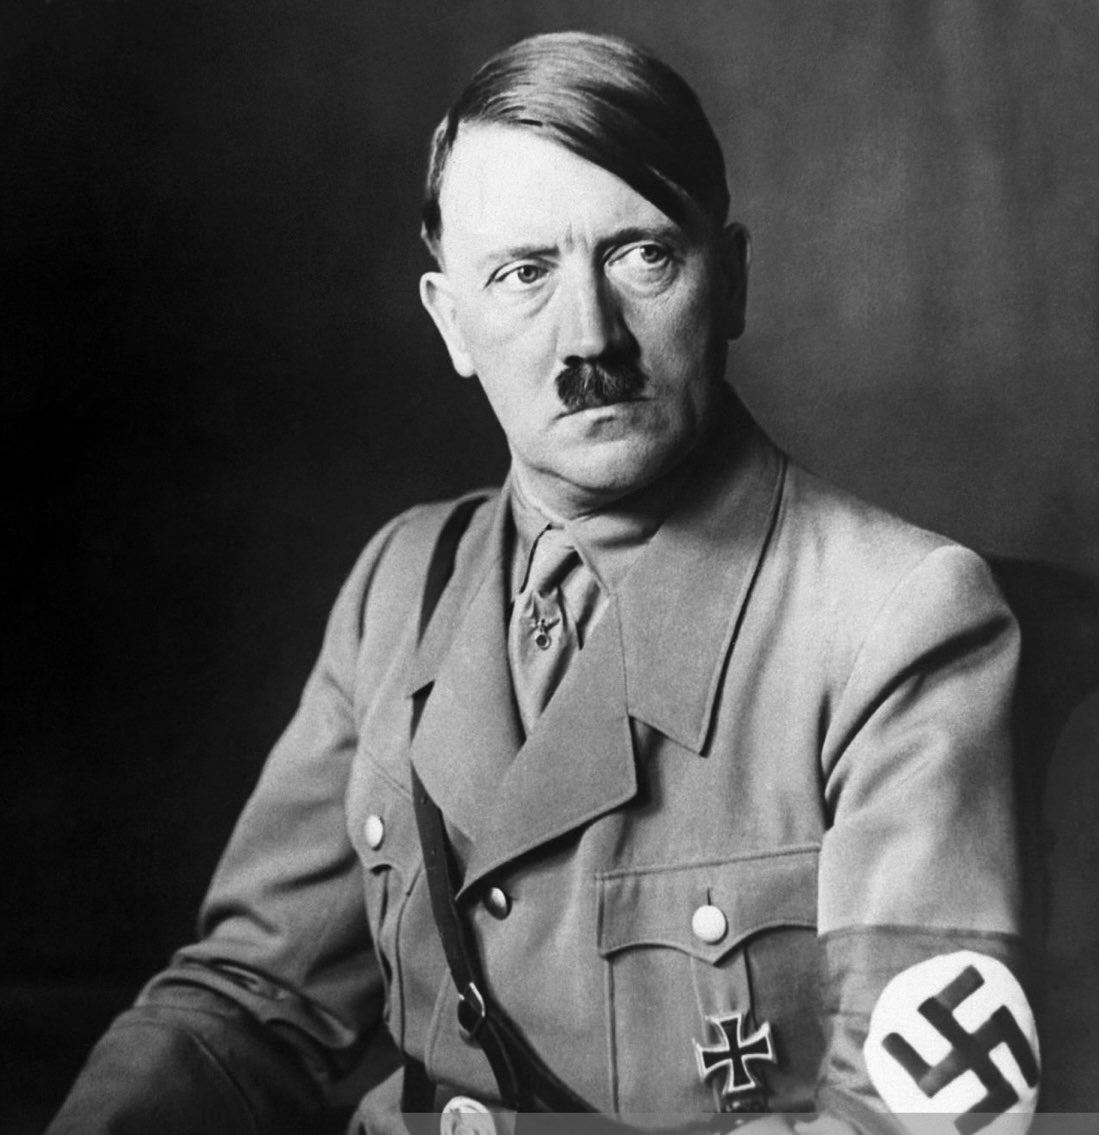 @RealSeanHoff Reminds me of the Hitler haircut.